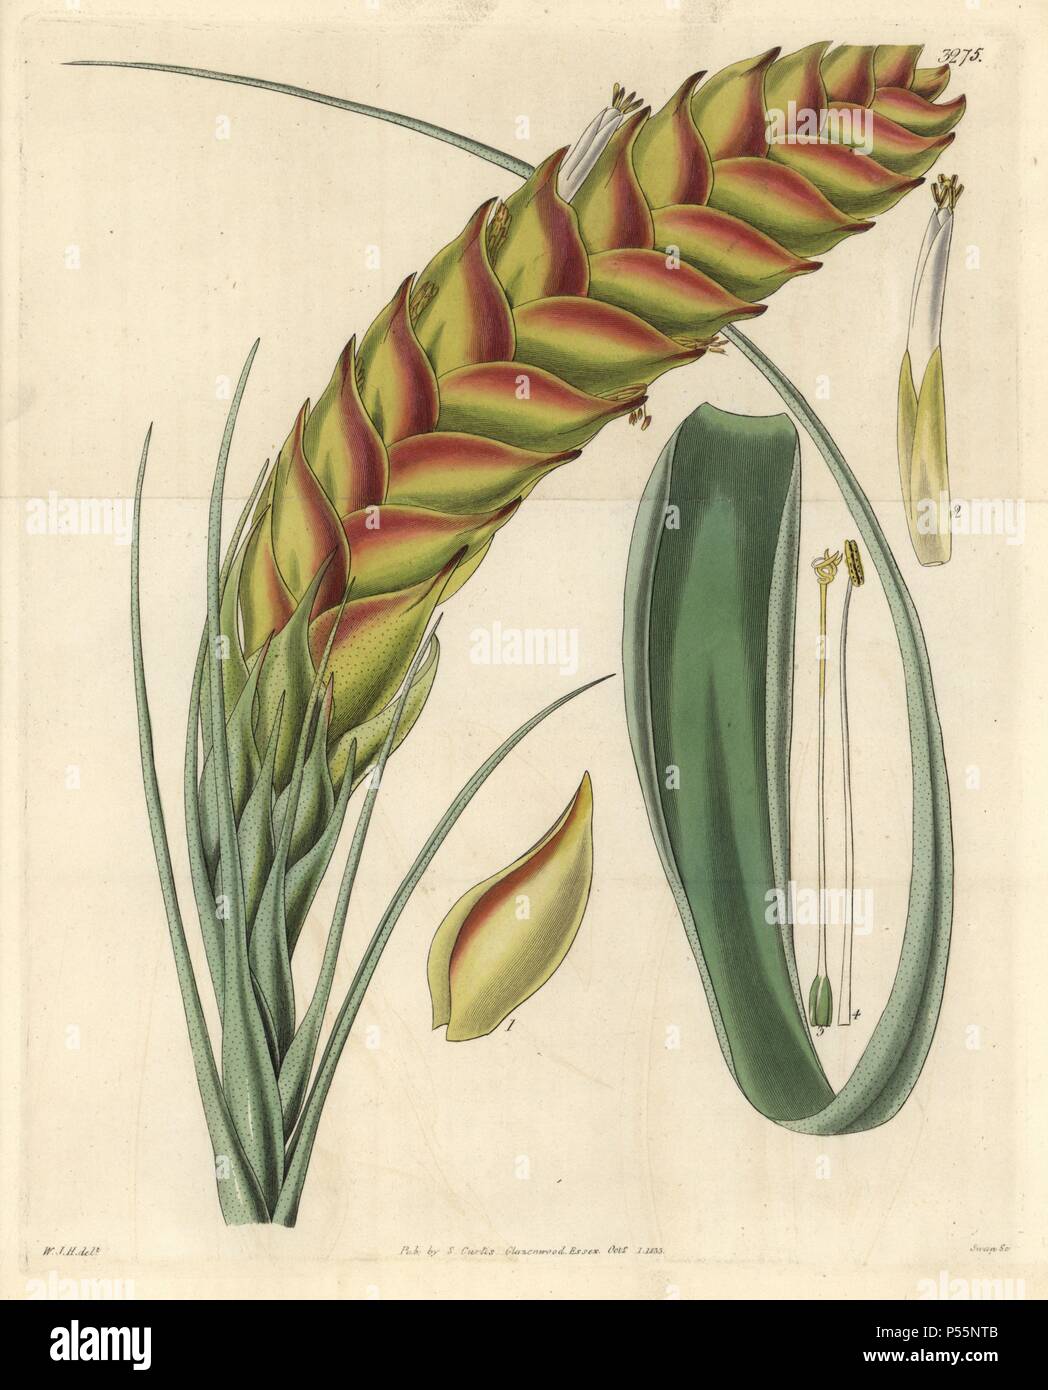 Needleleaf airplant, Tillandsia setacea. Illustration drawn by William Jackson Hooker, engraved by Swan. Handcolored copperplate engraving from William Curtis's 'The Botanical Magazine,' Samuel Curtis, 1833. Hooker (1785-1865) was an English botanist, writer and artist. He was Regius Professor of Botany at Glasgow University, and editor of Curtis' 'Botanical Magazine' from 1827 to 1865. In 1841, he was appointed director of the Royal Botanic Gardens at Kew, and was succeeded by his son Joseph Dalton. Hooker documented the fern and orchid crazes that shook England in the mid-19th century in boo Stock Photo